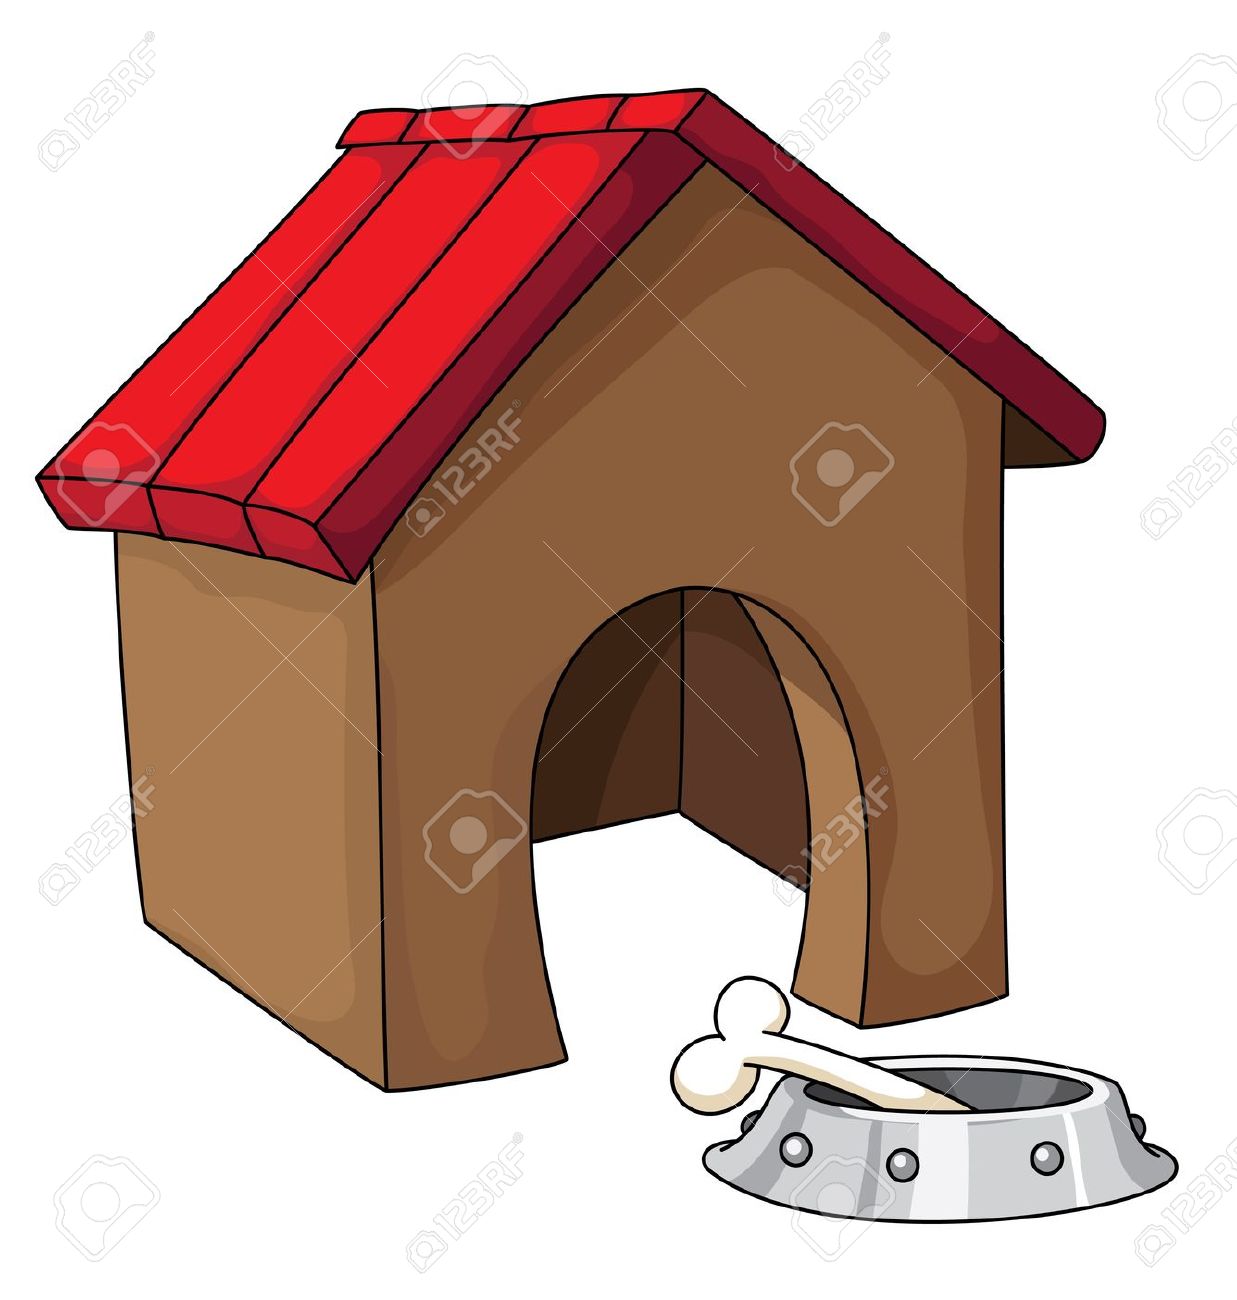 Dog kennel clipart - Clipground